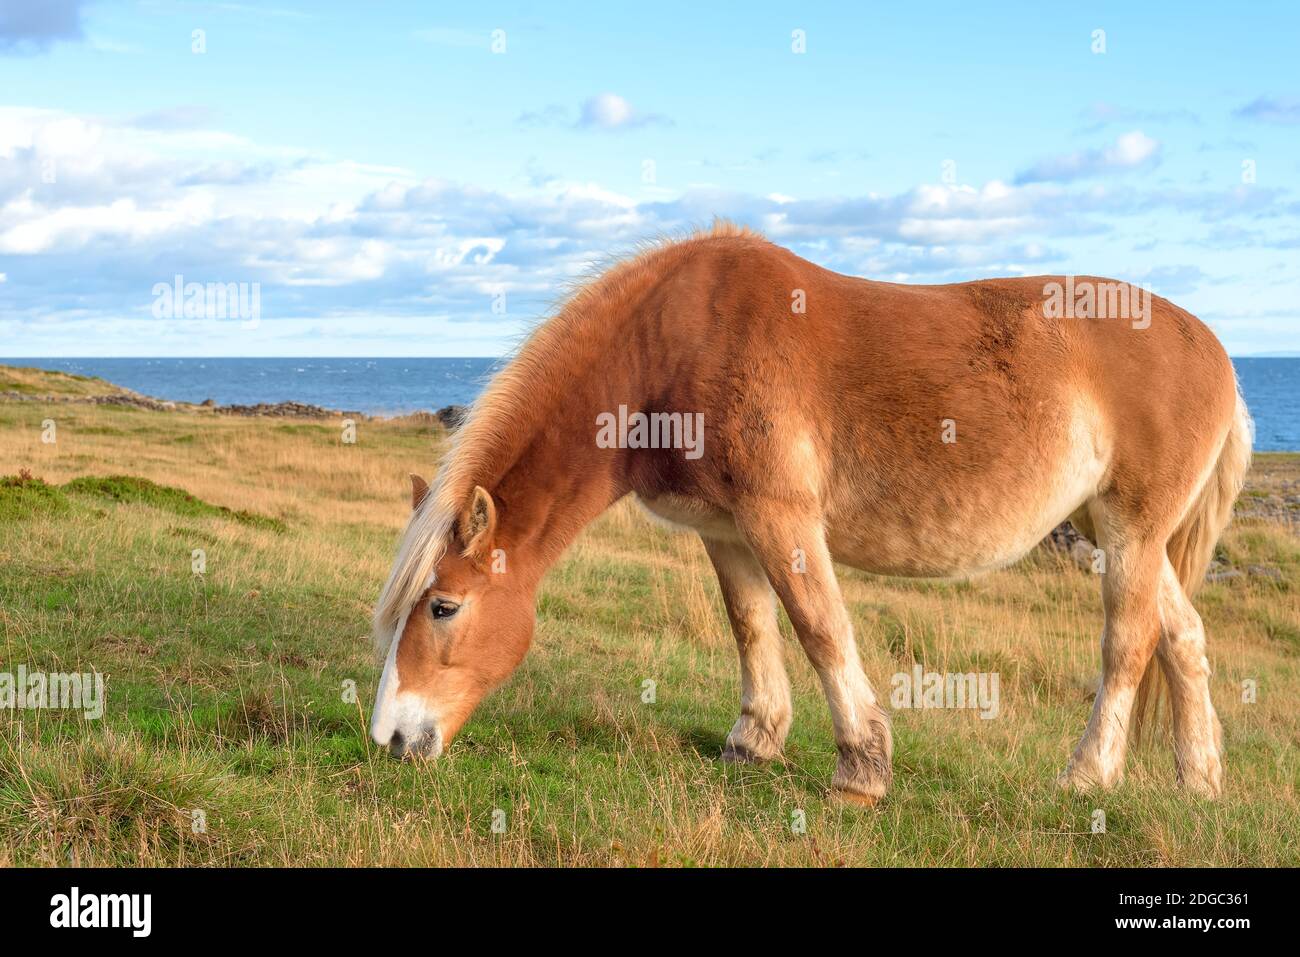 The red horse who is grazed on the seashore Stock Photo